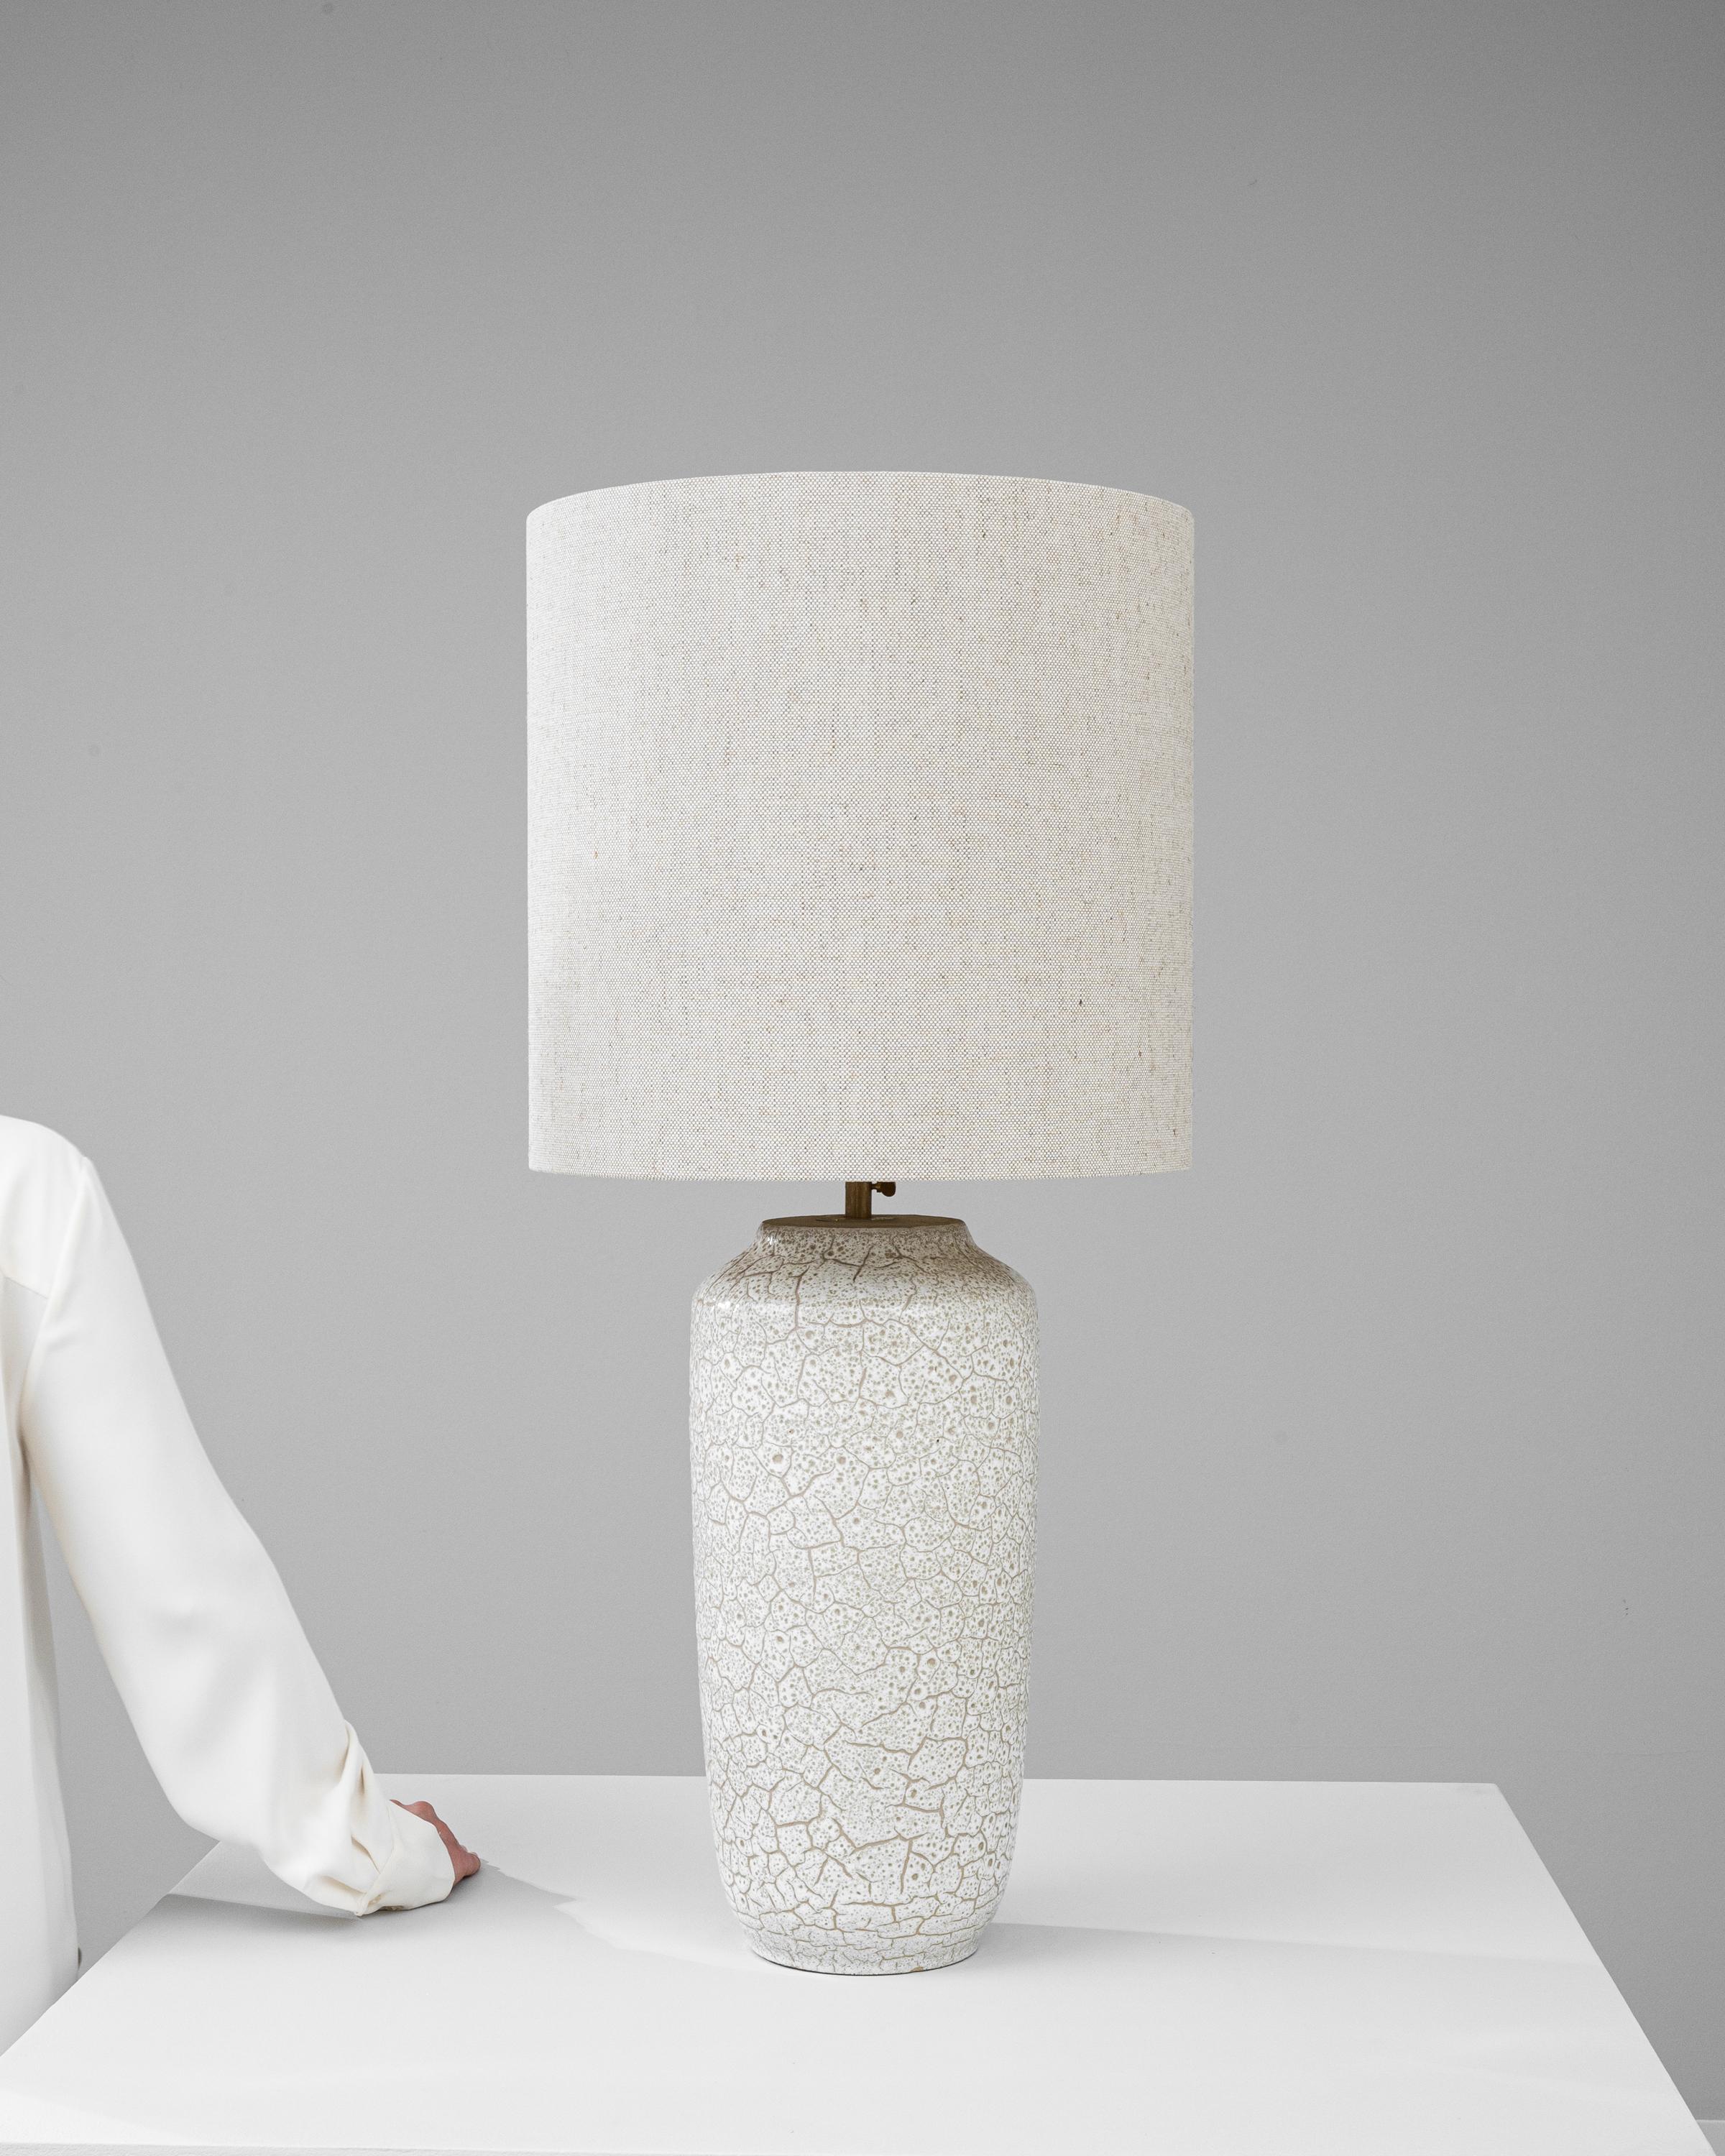 Bask in the delicate intricacy of this 20th Century German Ceramic Table Lamp, a piece that masterfully blends art and functionality. The lamp's surface is a canvas of crackled texture, resembling a fine mosaic of frost on a winter's day, creating